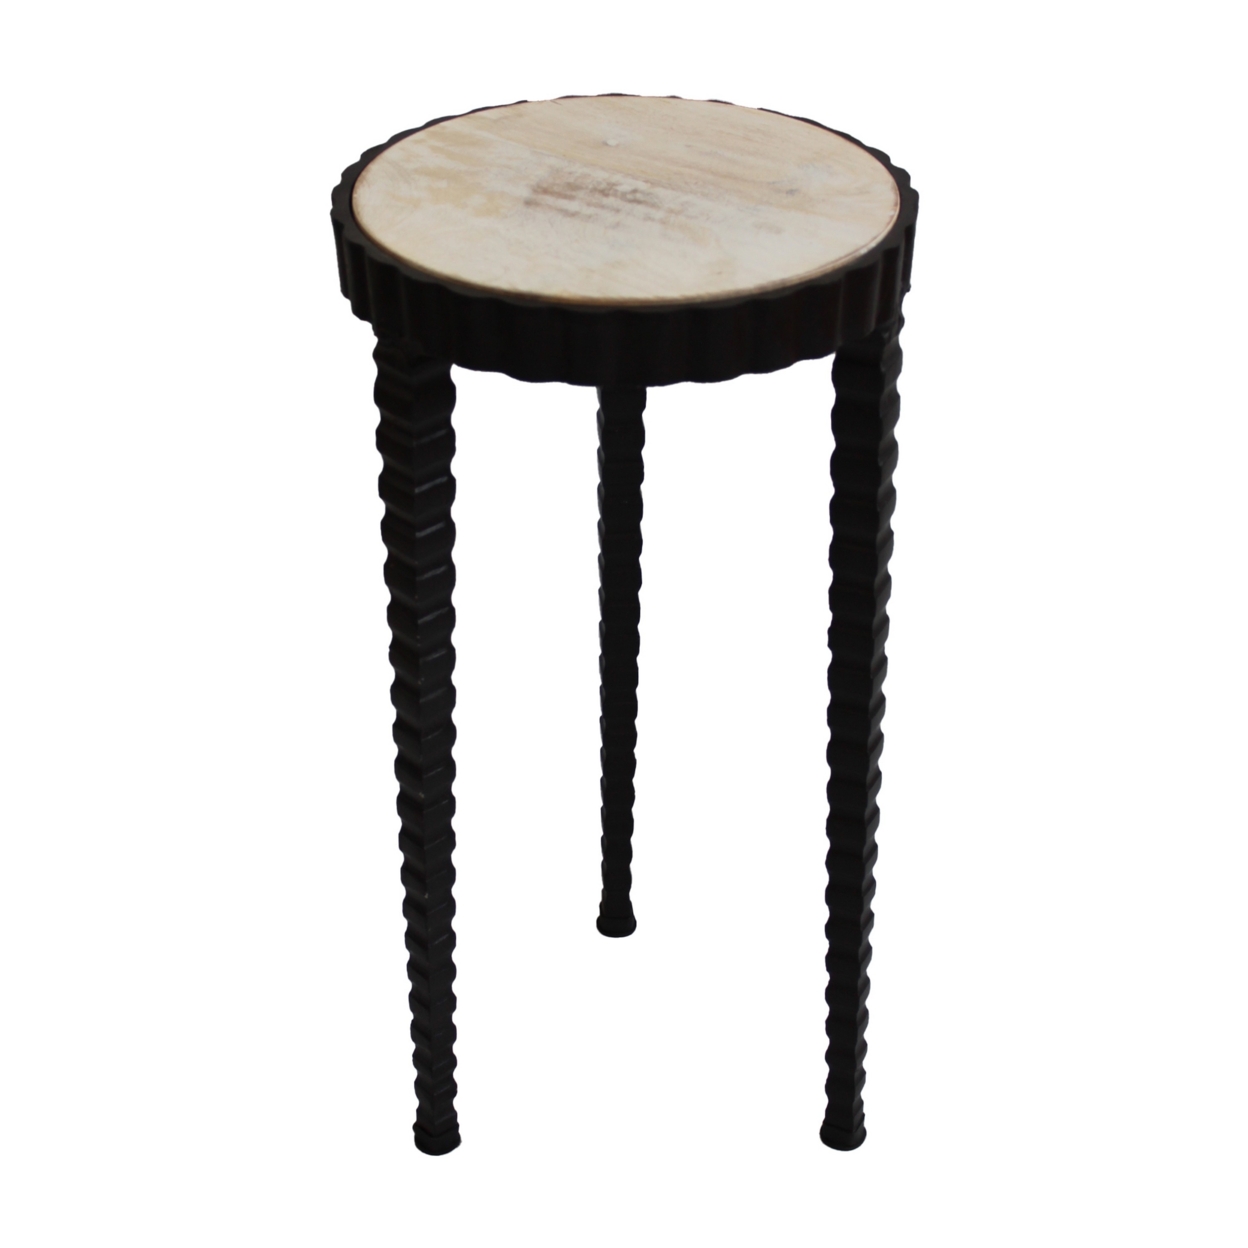 22 Inch Round Wooden Side Table With Tapered Tripod Base, Brown And Black- Saltoro Sherpi